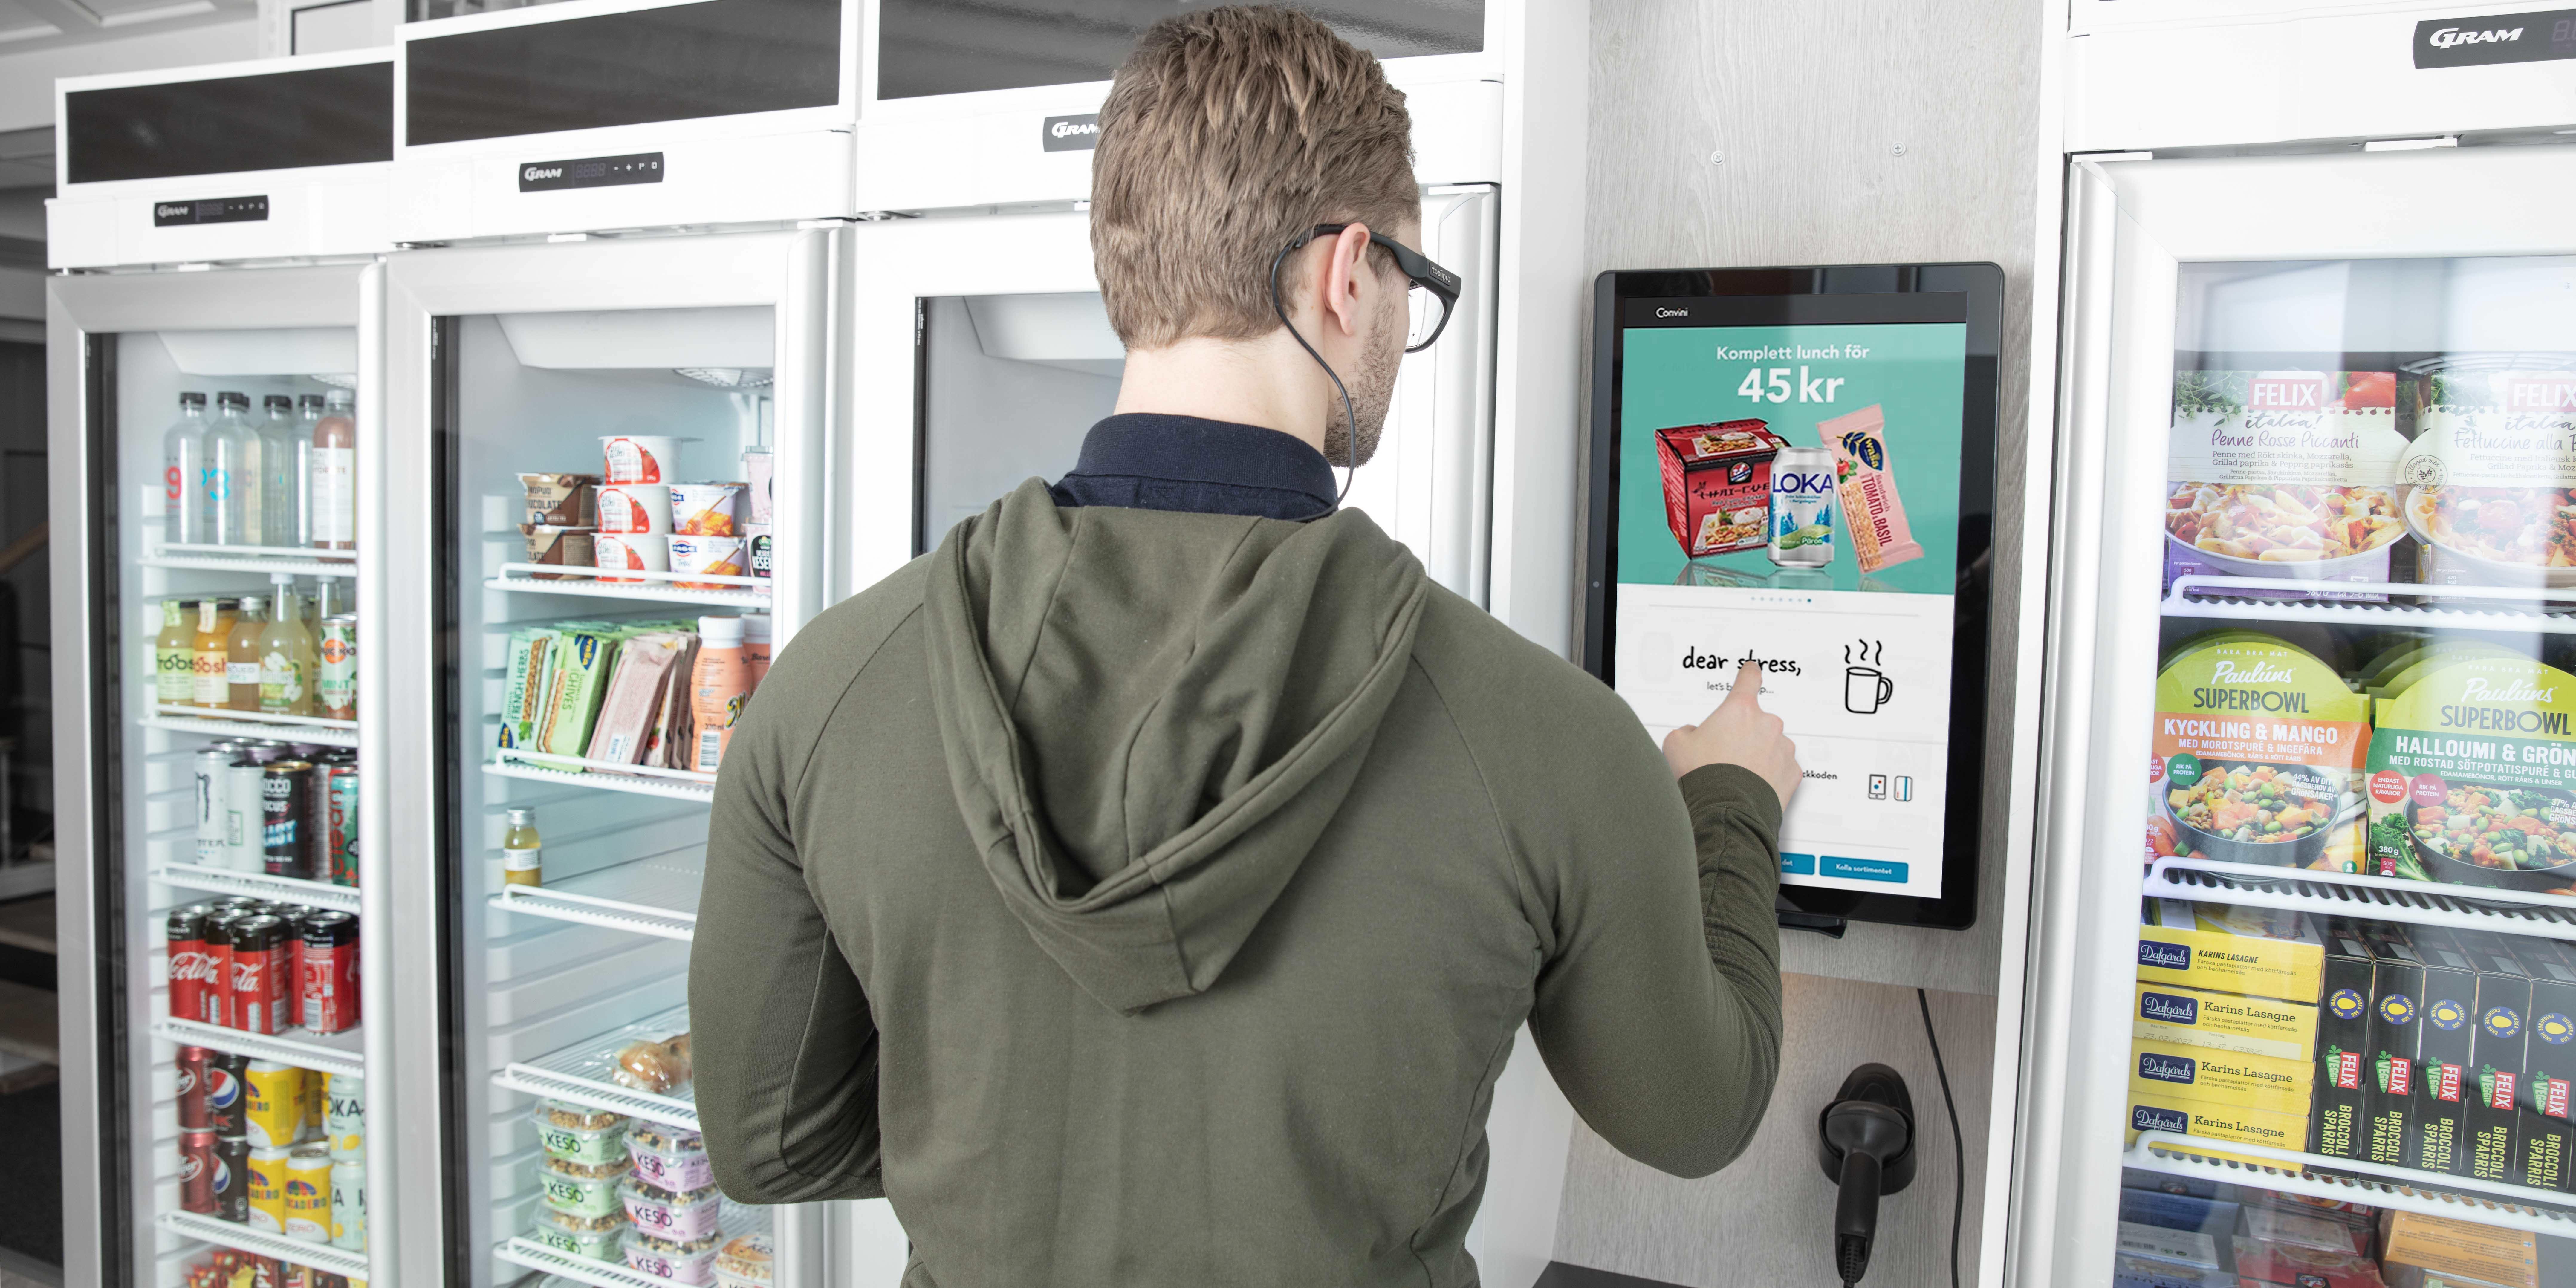 Man wearing Glasses 3 to purchase vending machine food